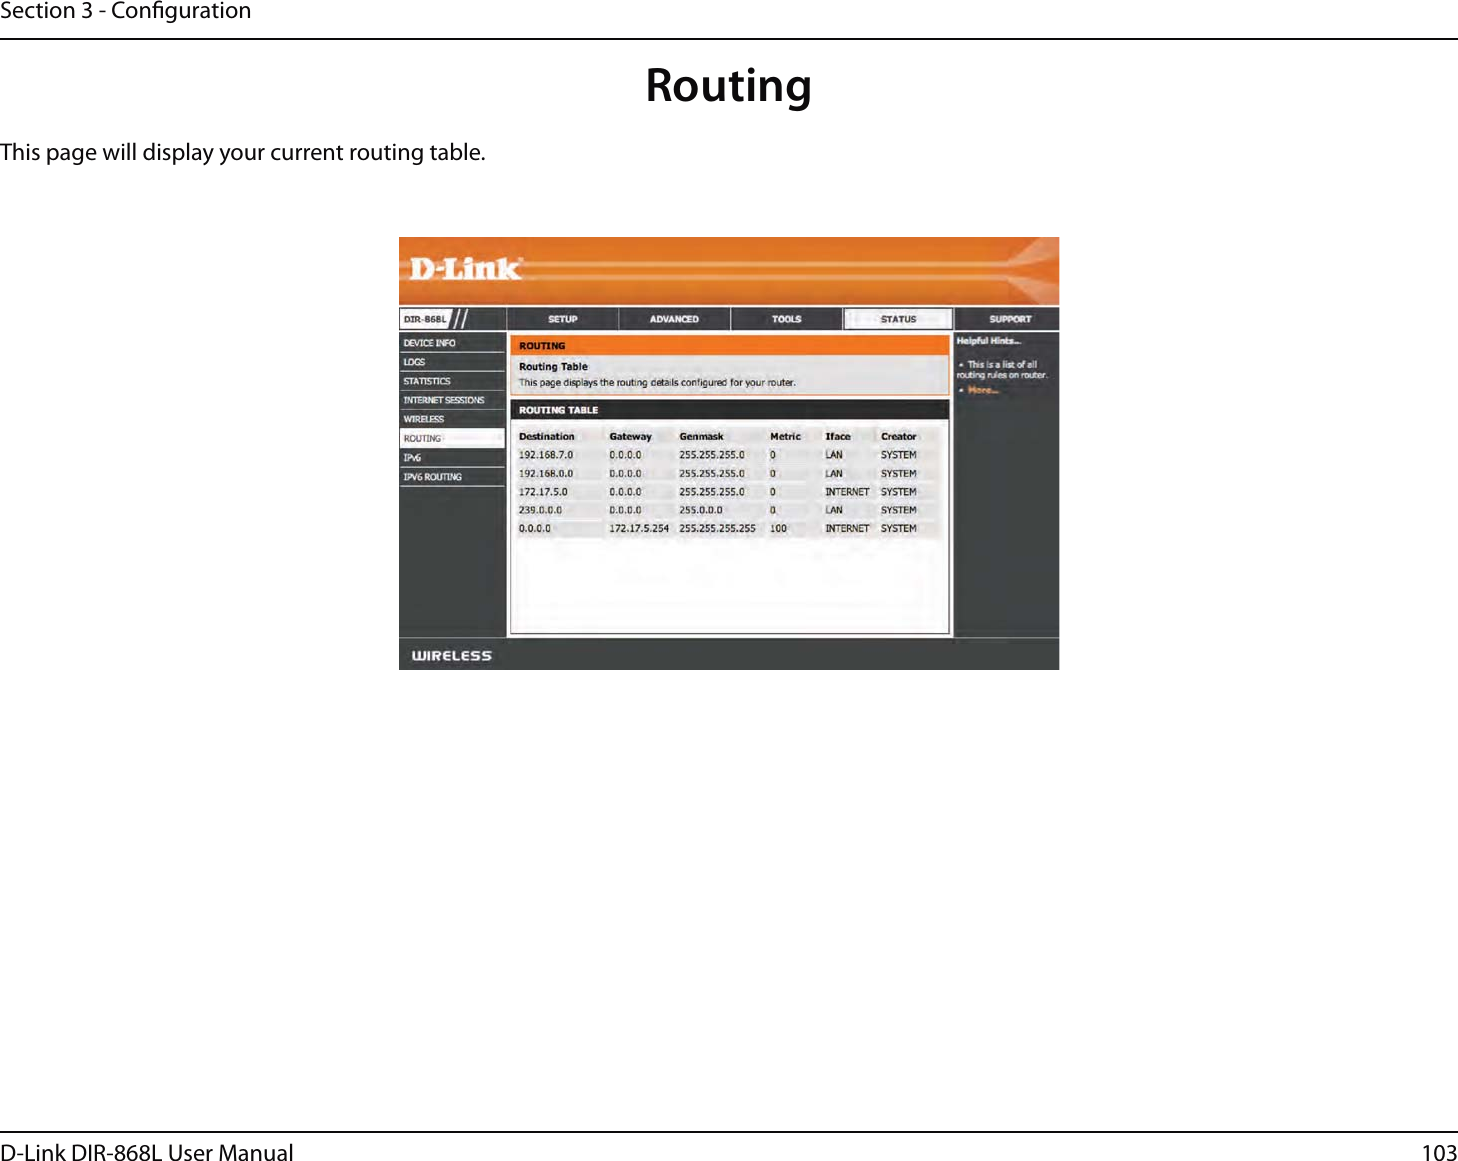 103D-Link DIR-868L User ManualSection 3 - CongurationRoutingThis page will display your current routing table.